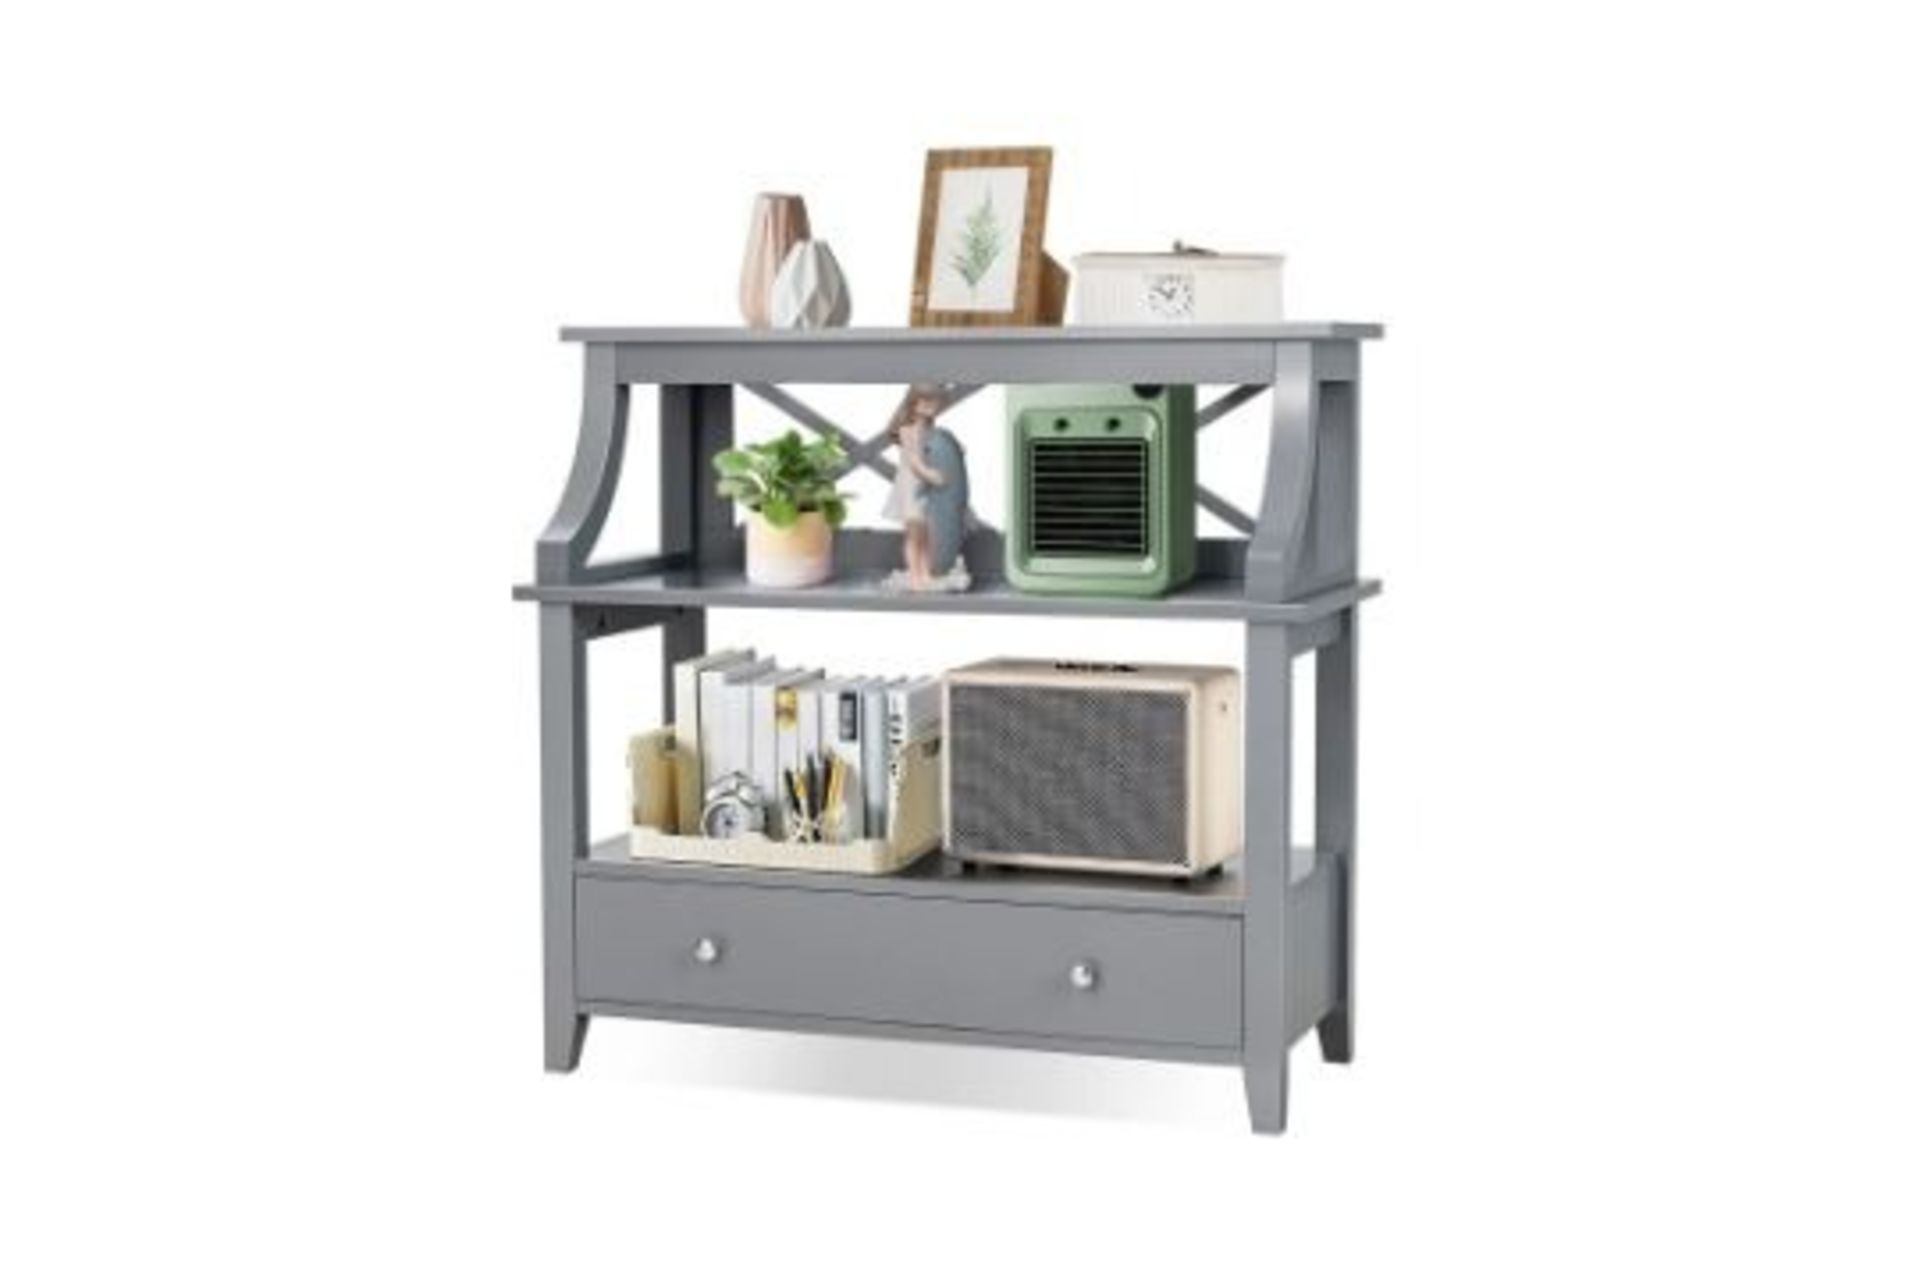 3-Tier X-Shaped Console Table with Drawer and Open Storage Shelves-Grey. - ER24